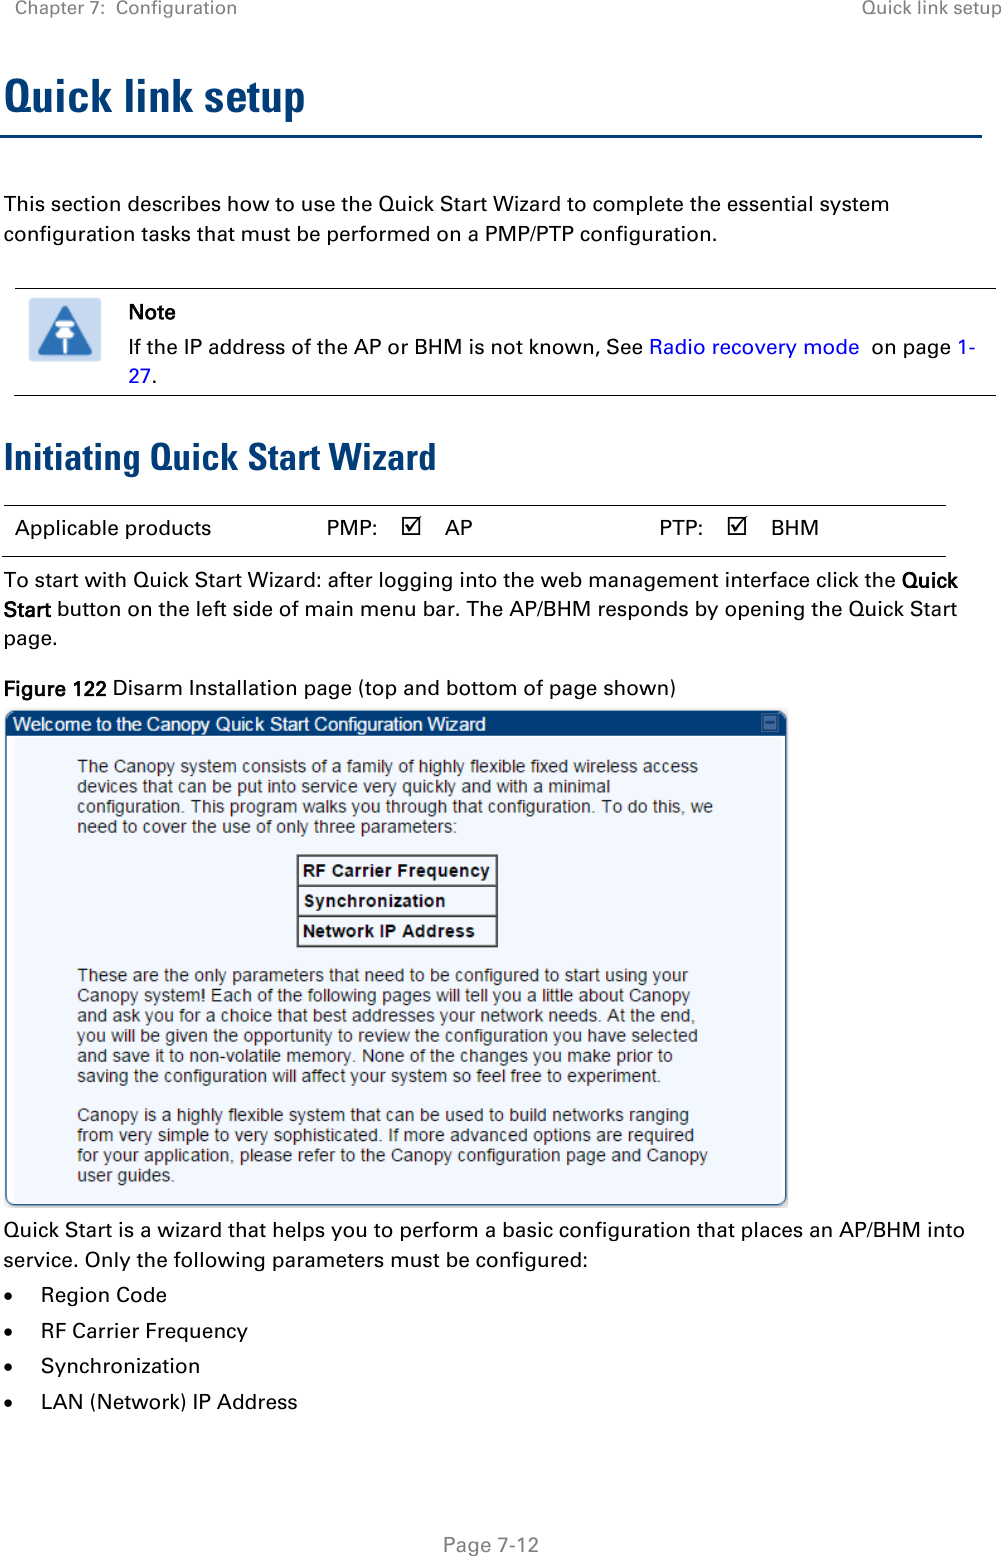 Chapter 7:  Configuration Quick link setup   Page 7-12 Quick link setup This section describes how to use the Quick Start Wizard to complete the essential system configuration tasks that must be performed on a PMP/PTP configuration.   Note If the IP address of the AP or BHM is not known, See Radio recovery mode  on page 1-27. Initiating Quick Start Wizard Applicable products  PMP:   AP    PTP:   BHM   To start with Quick Start Wizard: after logging into the web management interface click the Quick Start button on the left side of main menu bar. The AP/BHM responds by opening the Quick Start page. Figure 122 Disarm Installation page (top and bottom of page shown)  Quick Start is a wizard that helps you to perform a basic configuration that places an AP/BHM into service. Only the following parameters must be configured: • Region Code • RF Carrier Frequency • Synchronization • LAN (Network) IP Address 